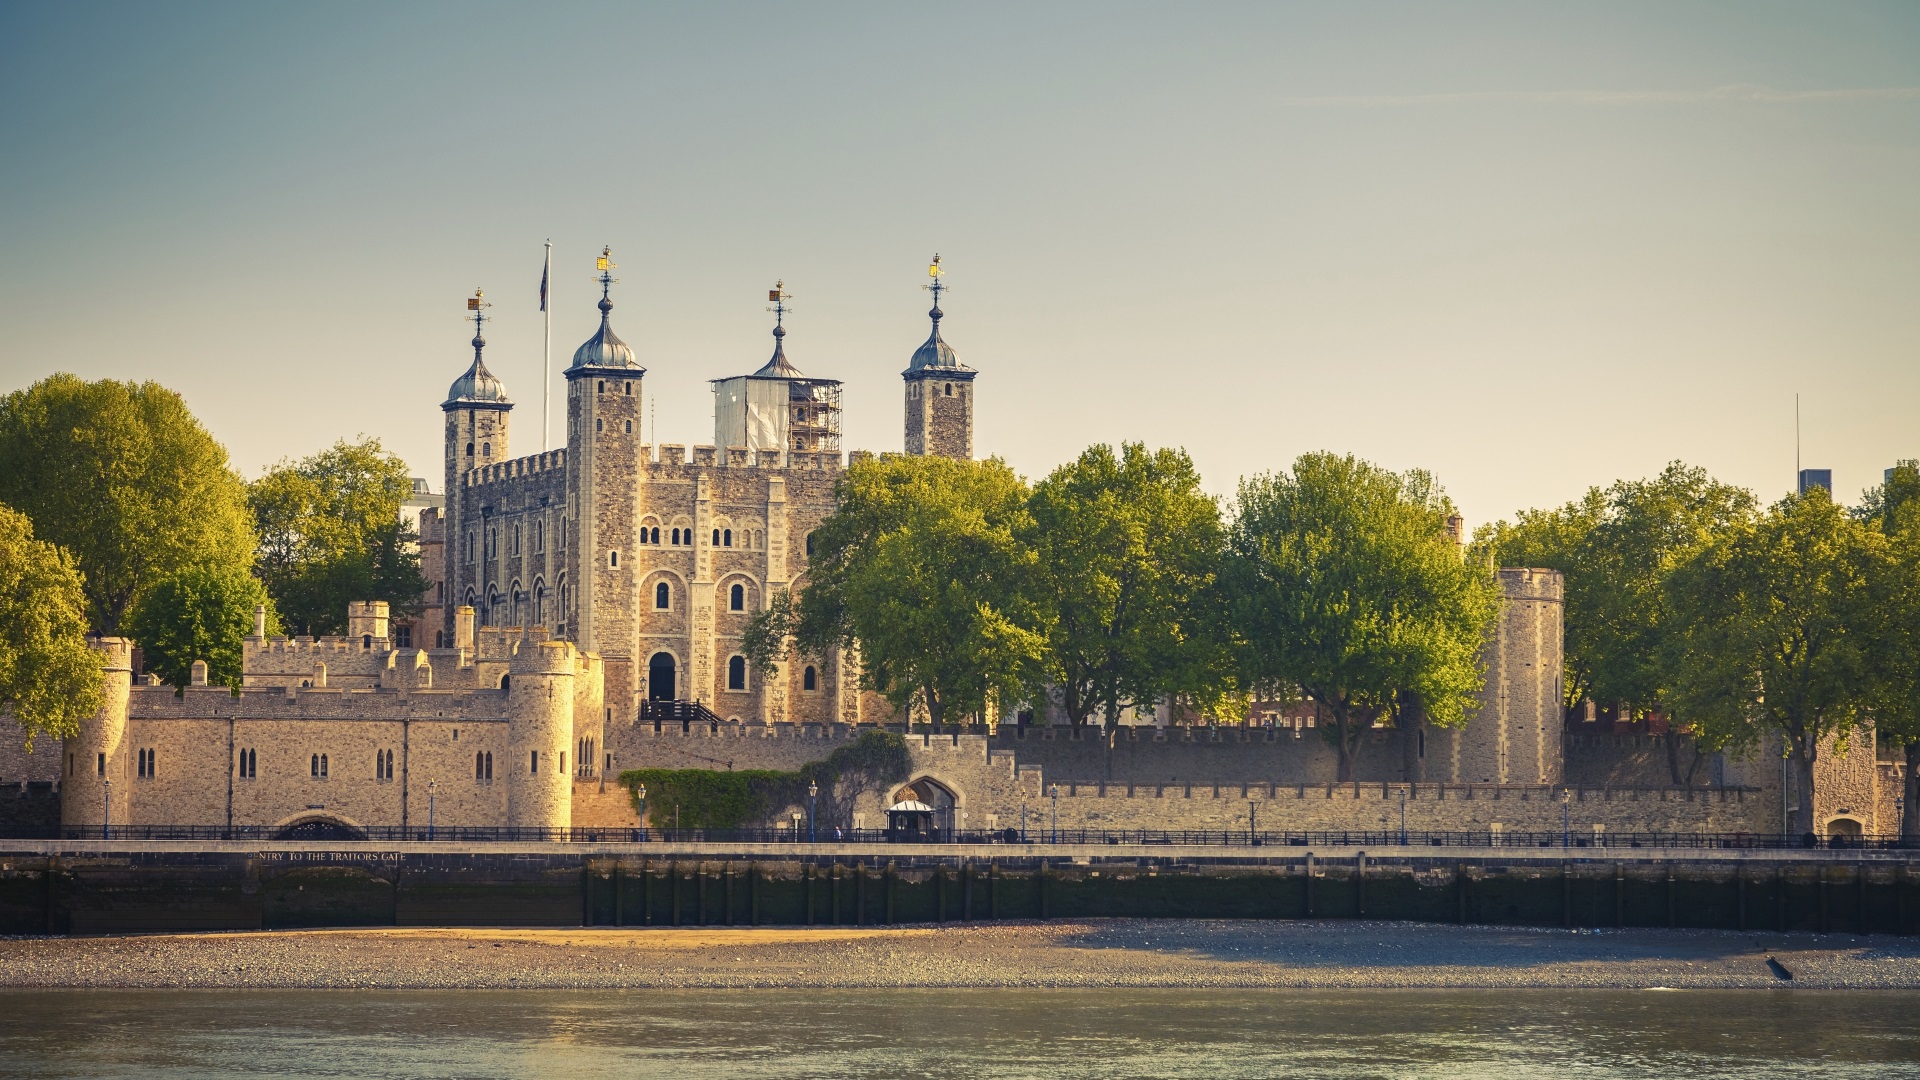 Tower of London viewed from the river Thames. 